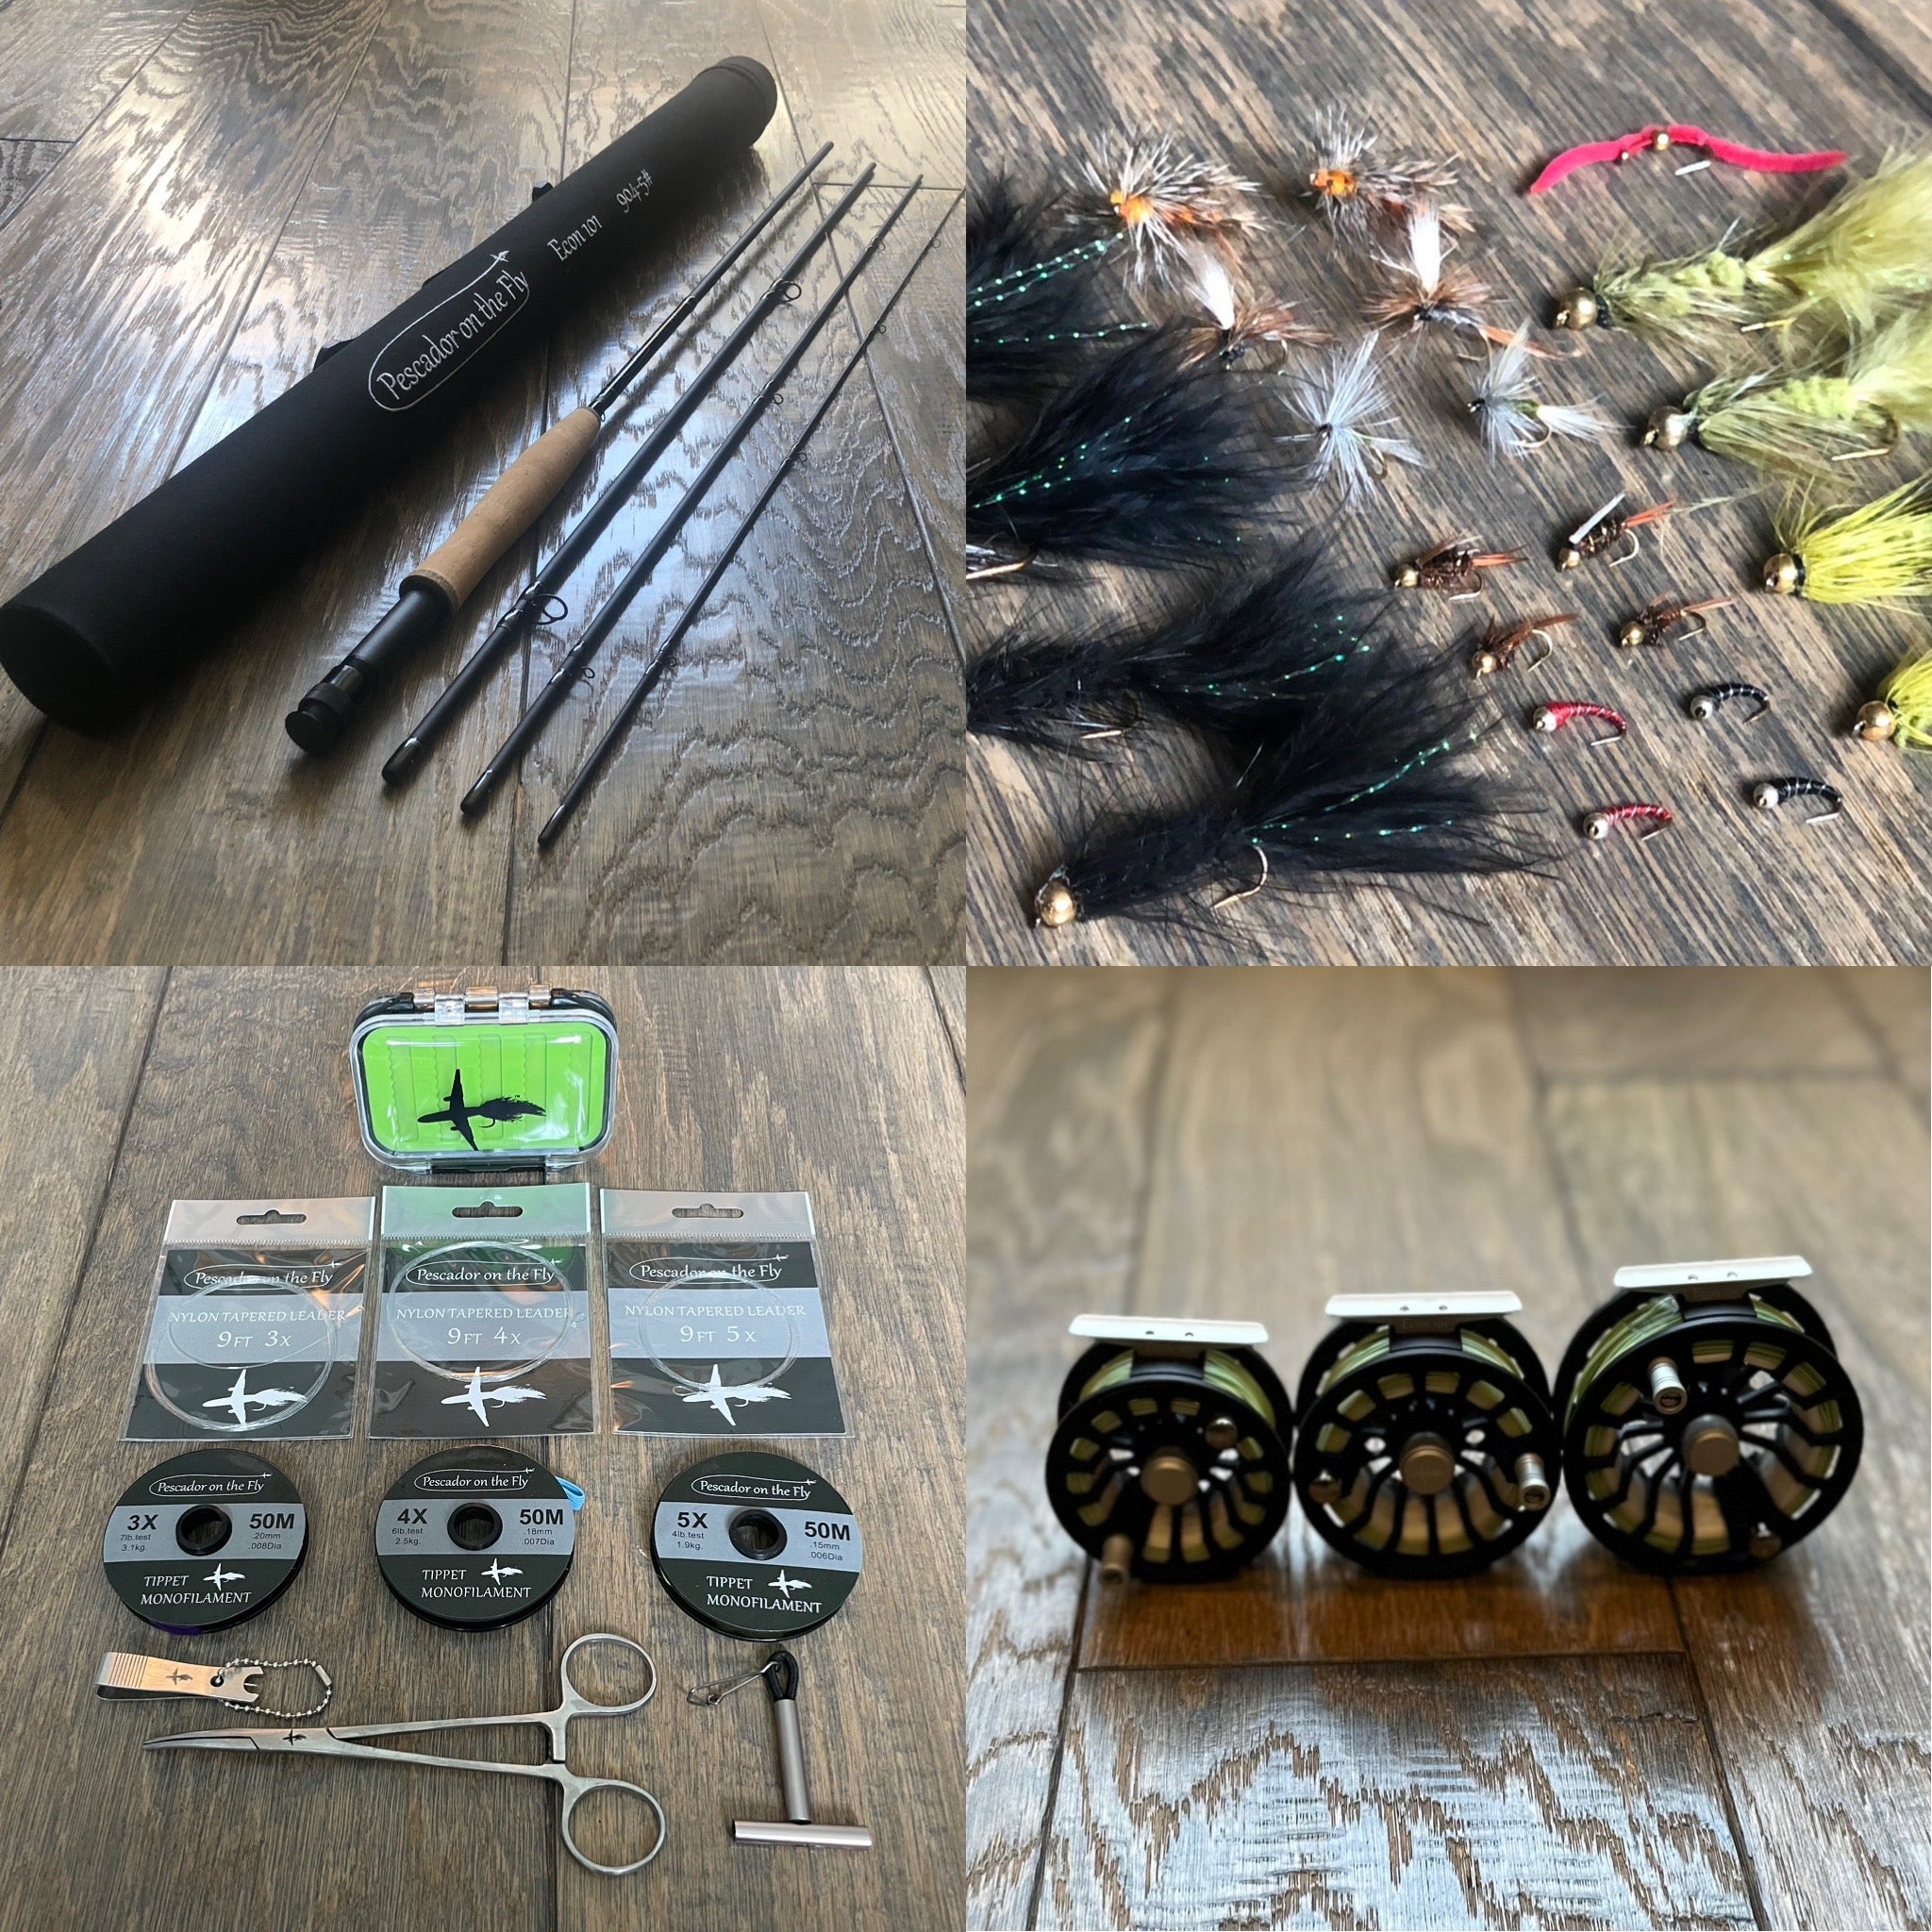 ECON 101 Fly Fishing Starter Combo Package | 904-5 | 9' Four Section 5 Weight Fly Rod And Reel Beginner Outfit